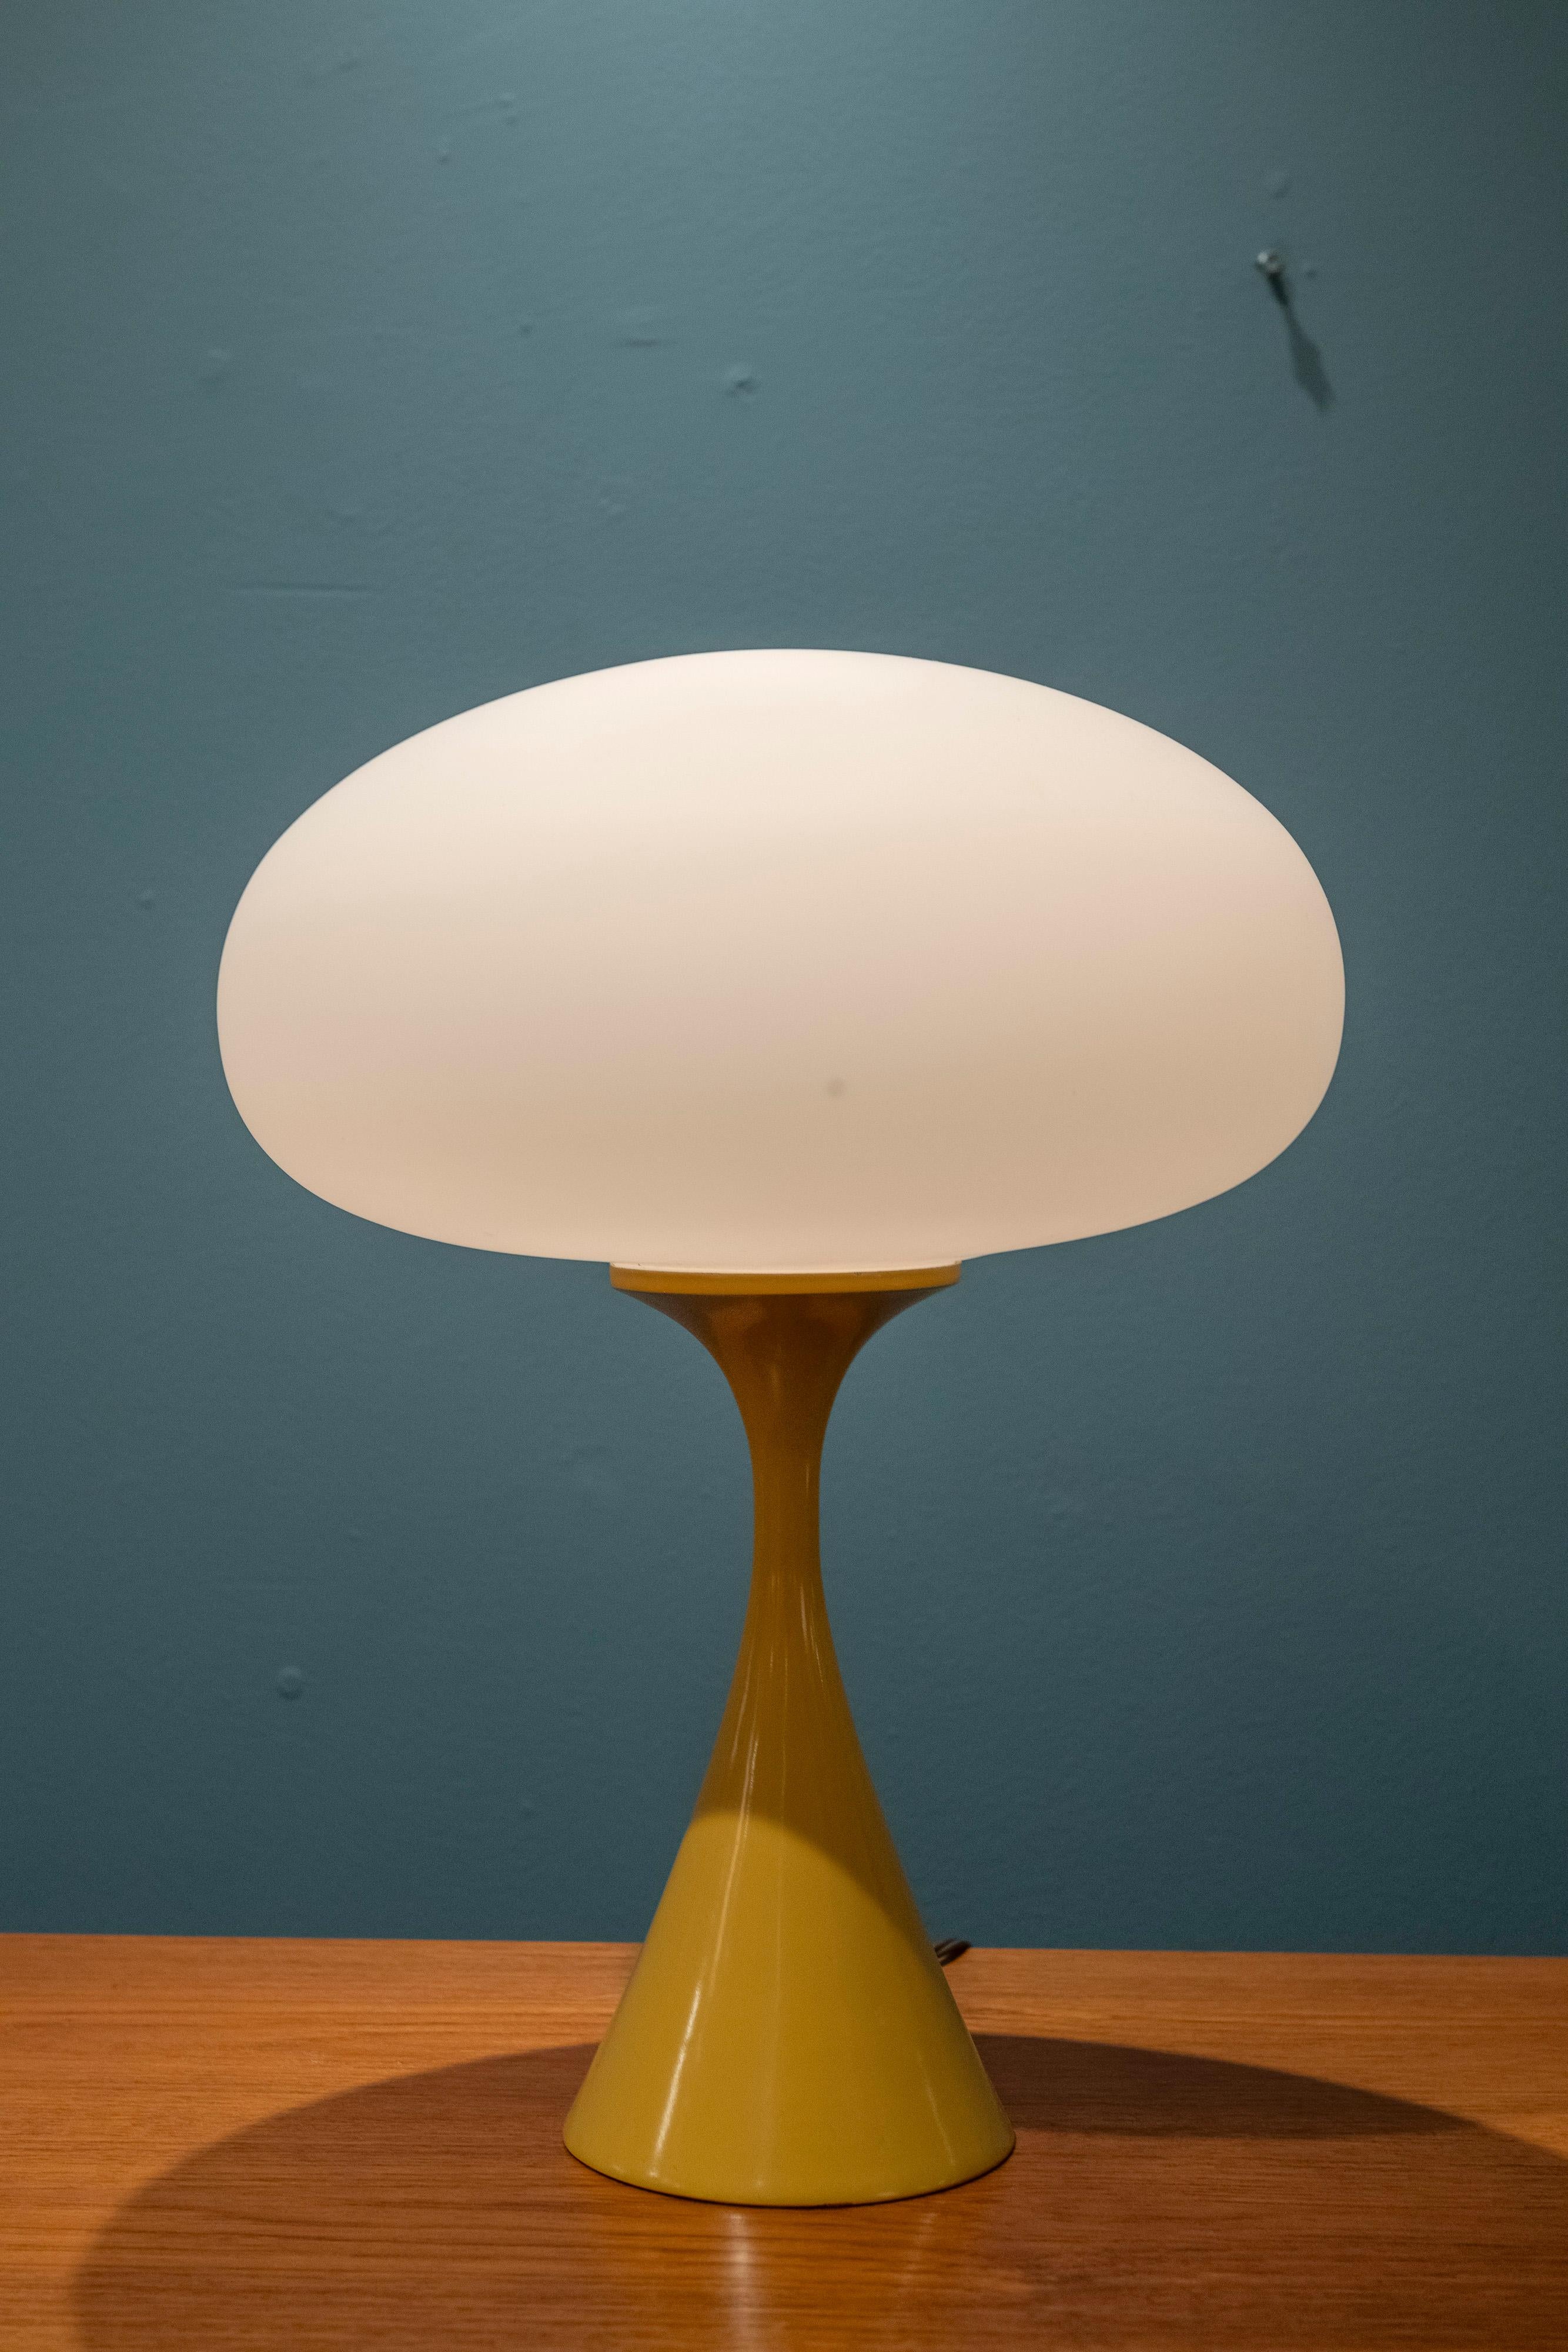 Original vintage Laurel mushroom lamp, U.S.A.. Gorgeous dijon yellow painted painted base with a three way switch. In very good condition and works as intended. Ready to install and enjoy.